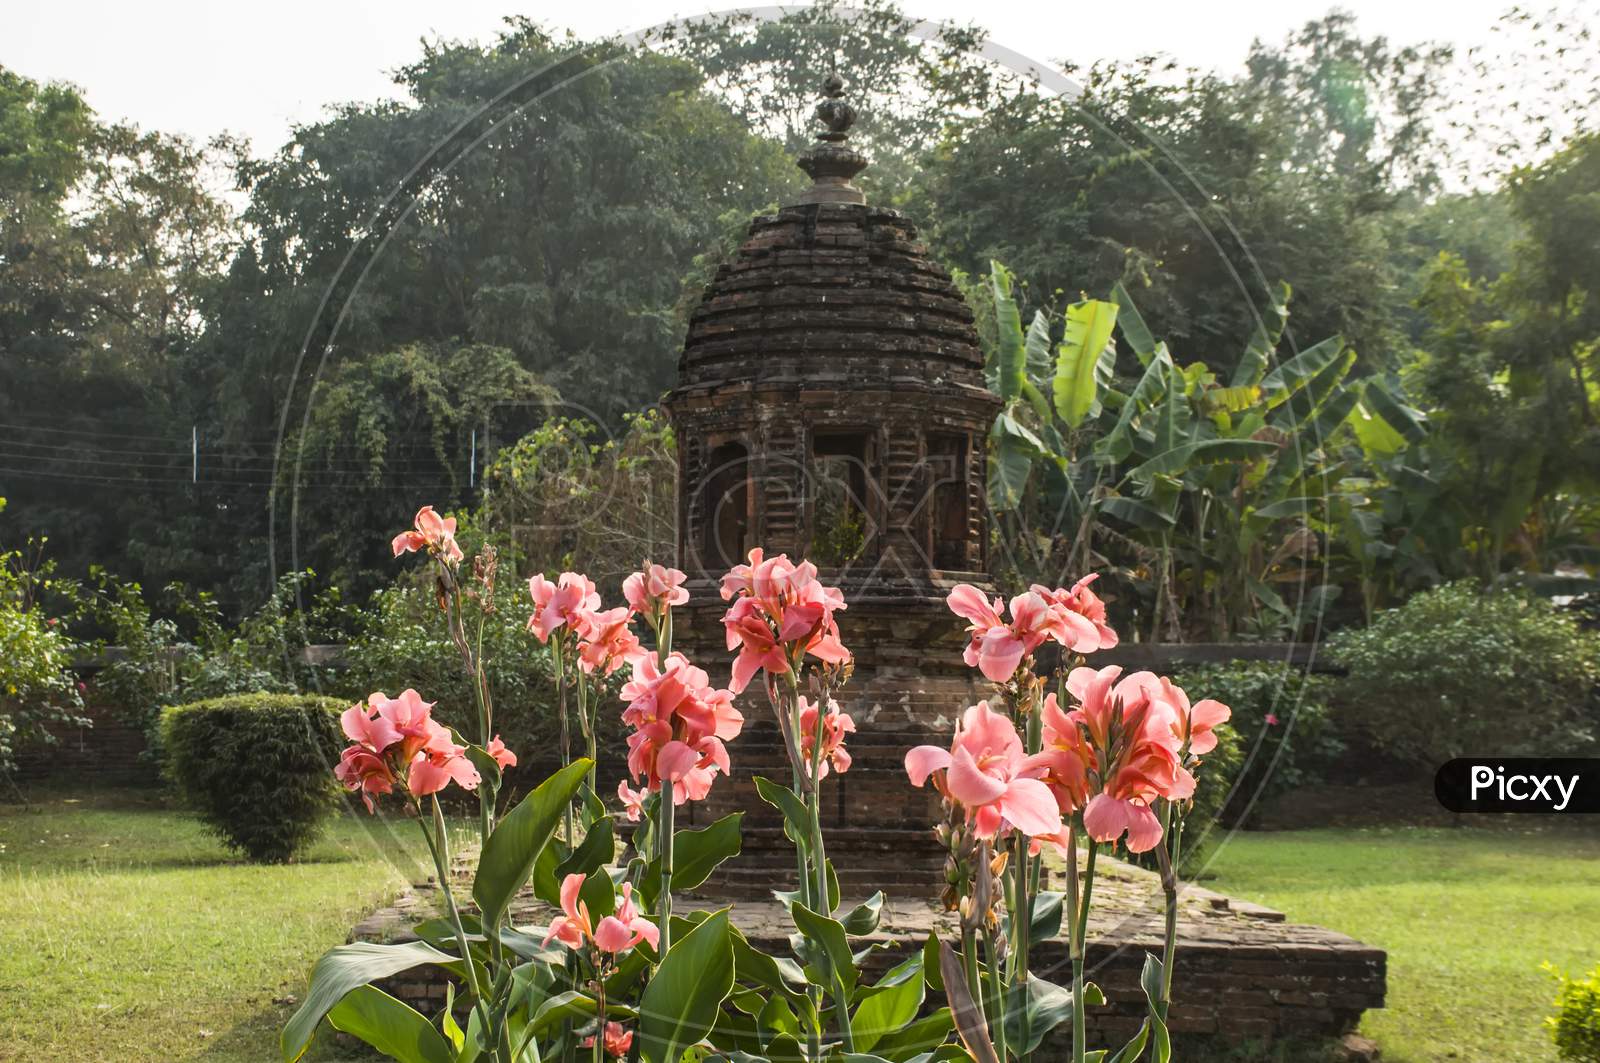 The pink flowers in a temple in back drop.